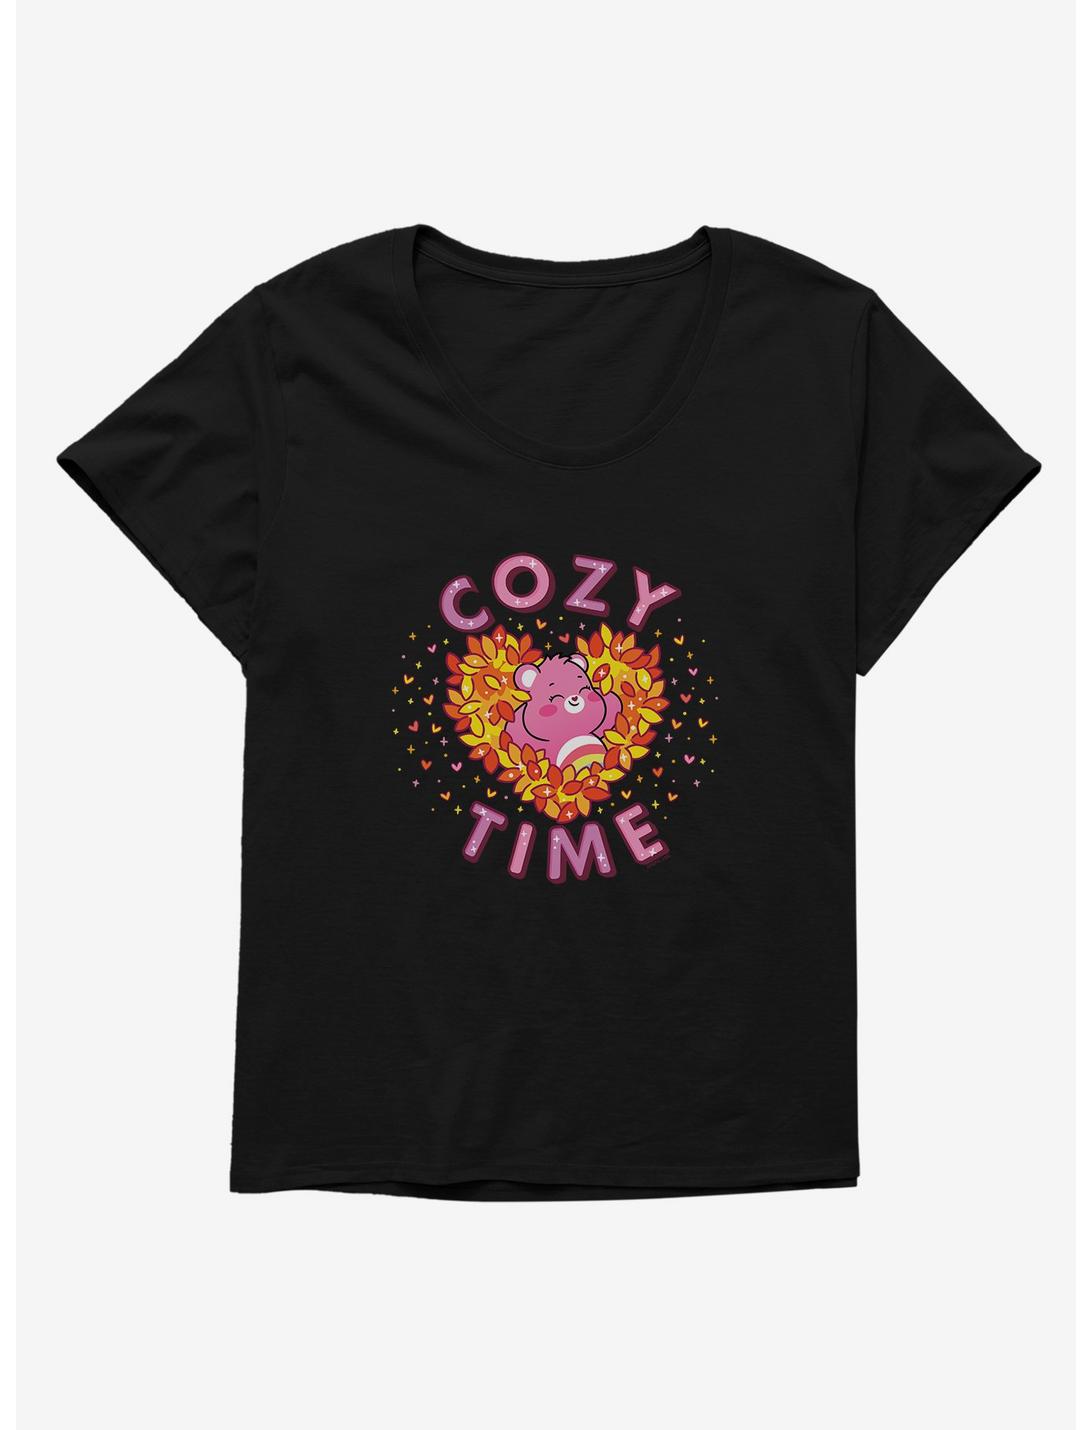 Care Bears Cozy Time Girls T-Shirt Plus Size, , hi-res